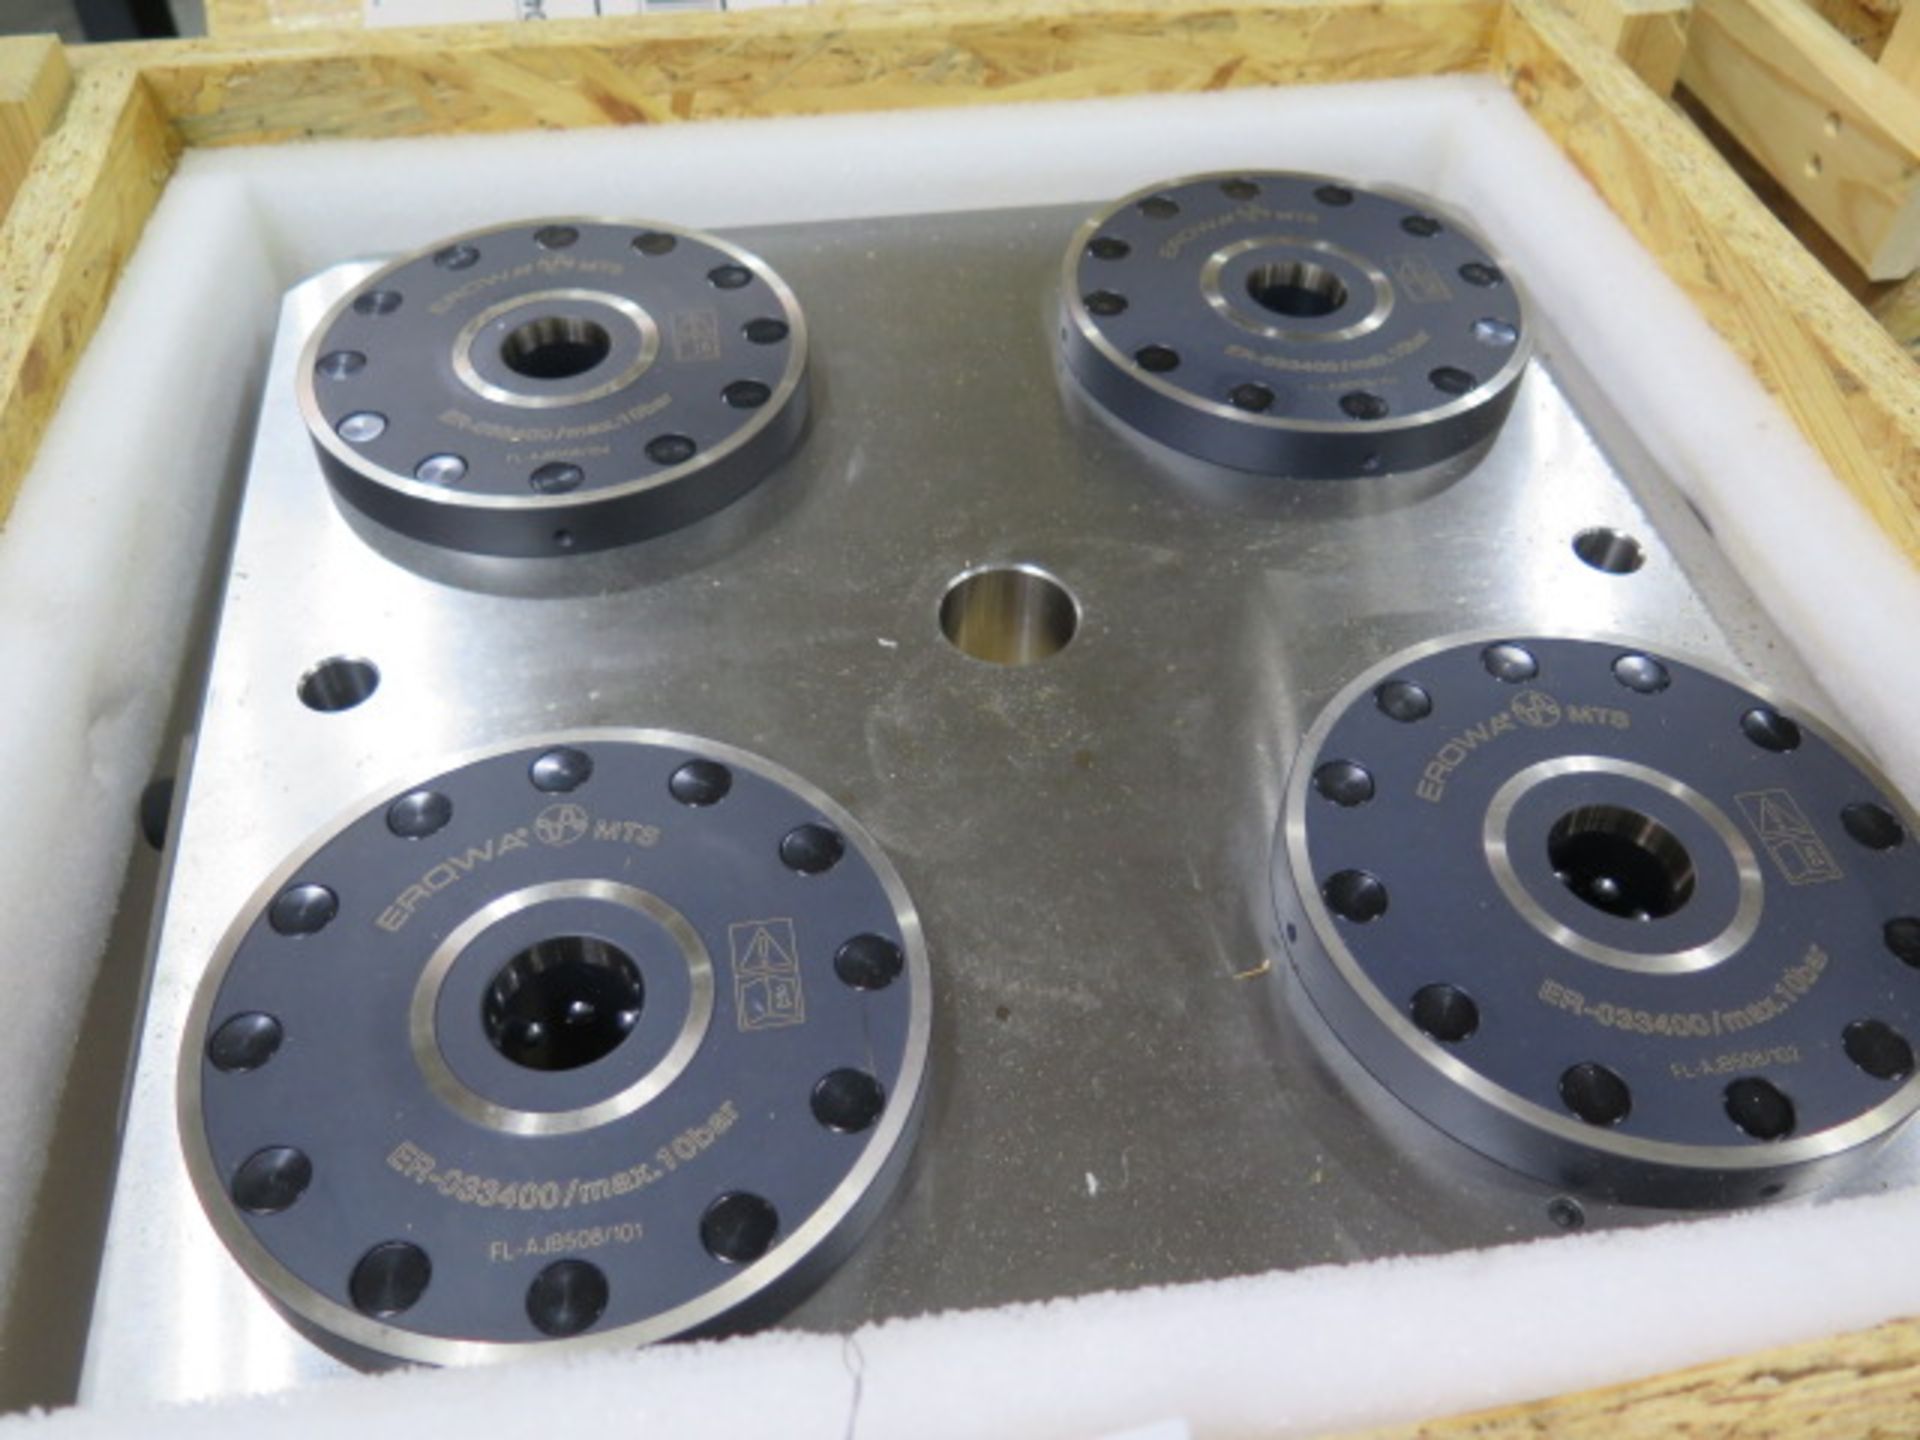 Erowa MTS ER-033300 "4-In-1" Base Plate w/ (4) Erowa ER-033400 MTS Chucks (NEW IN CRATE) (SOLD AS-IS - Image 3 of 7